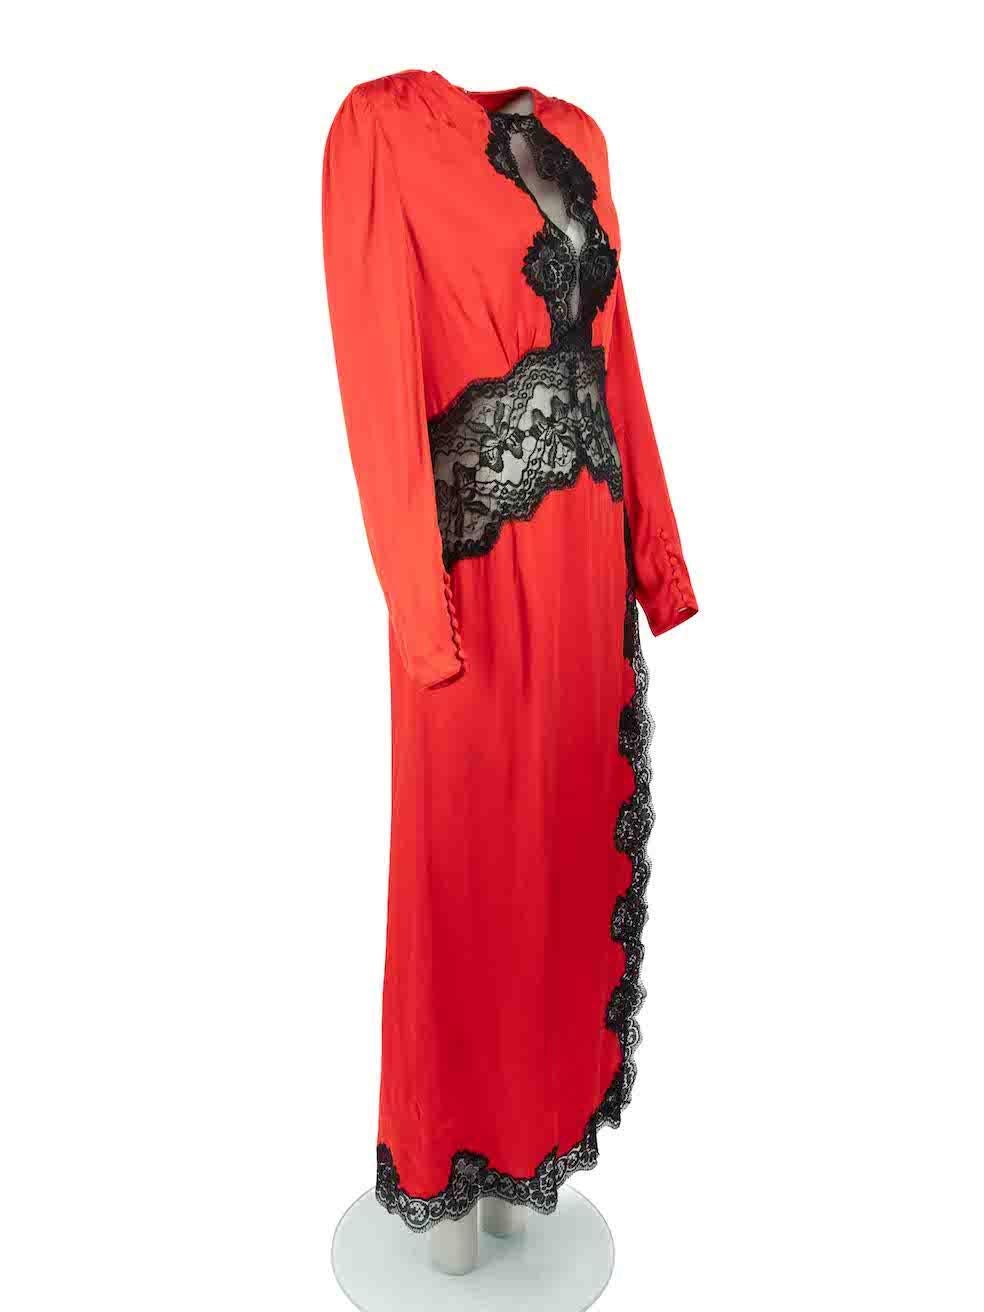 CONDITION is Never worn, with tags. No visible wear to dress is evident on this new Alessandra Rich designer resale item. Please note that the care label is partly detached.
 
Details
Red
Viscose
Dress
Long sleeves
Round neck
Front keyhole
Black